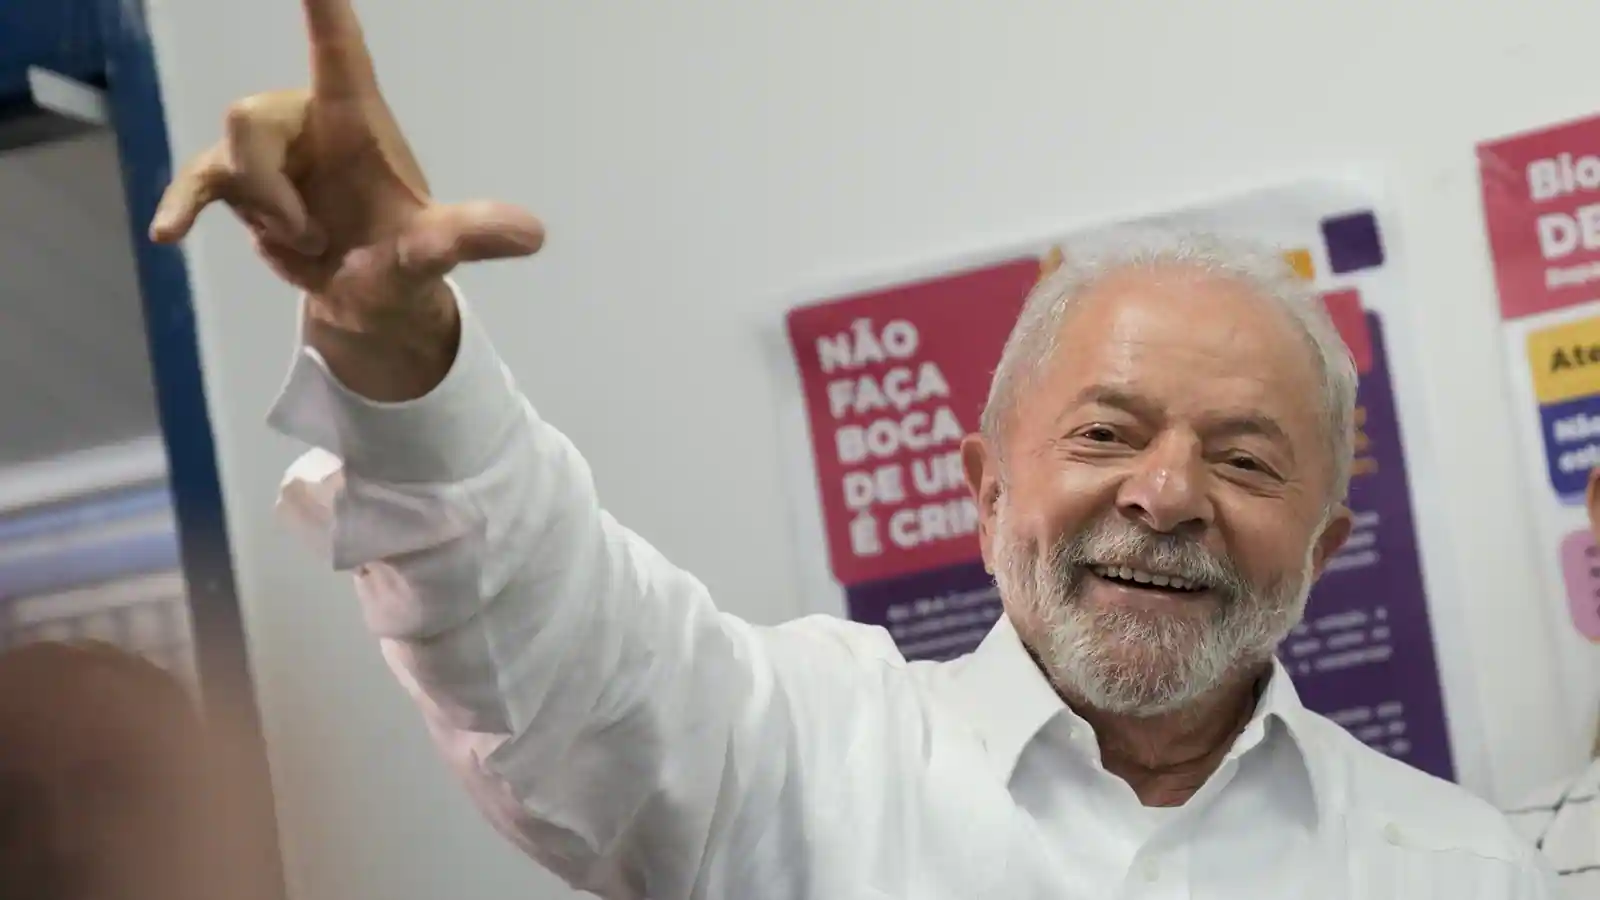 Lula calls for peace after winning Brazil's presidential election